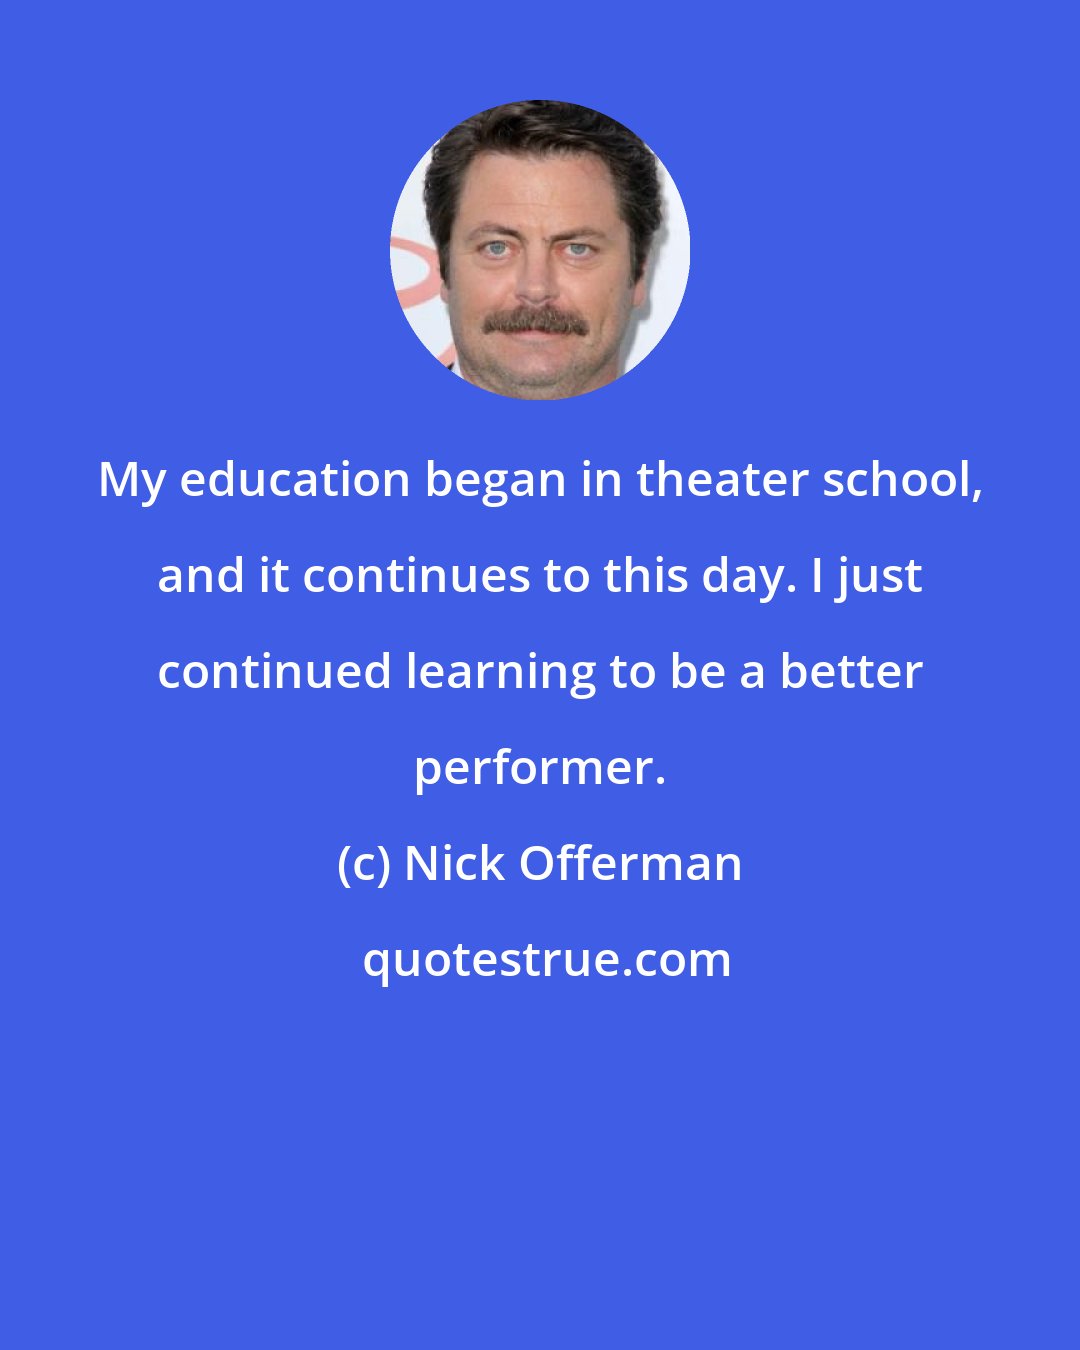 Nick Offerman: My education began in theater school, and it continues to this day. I just continued learning to be a better performer.